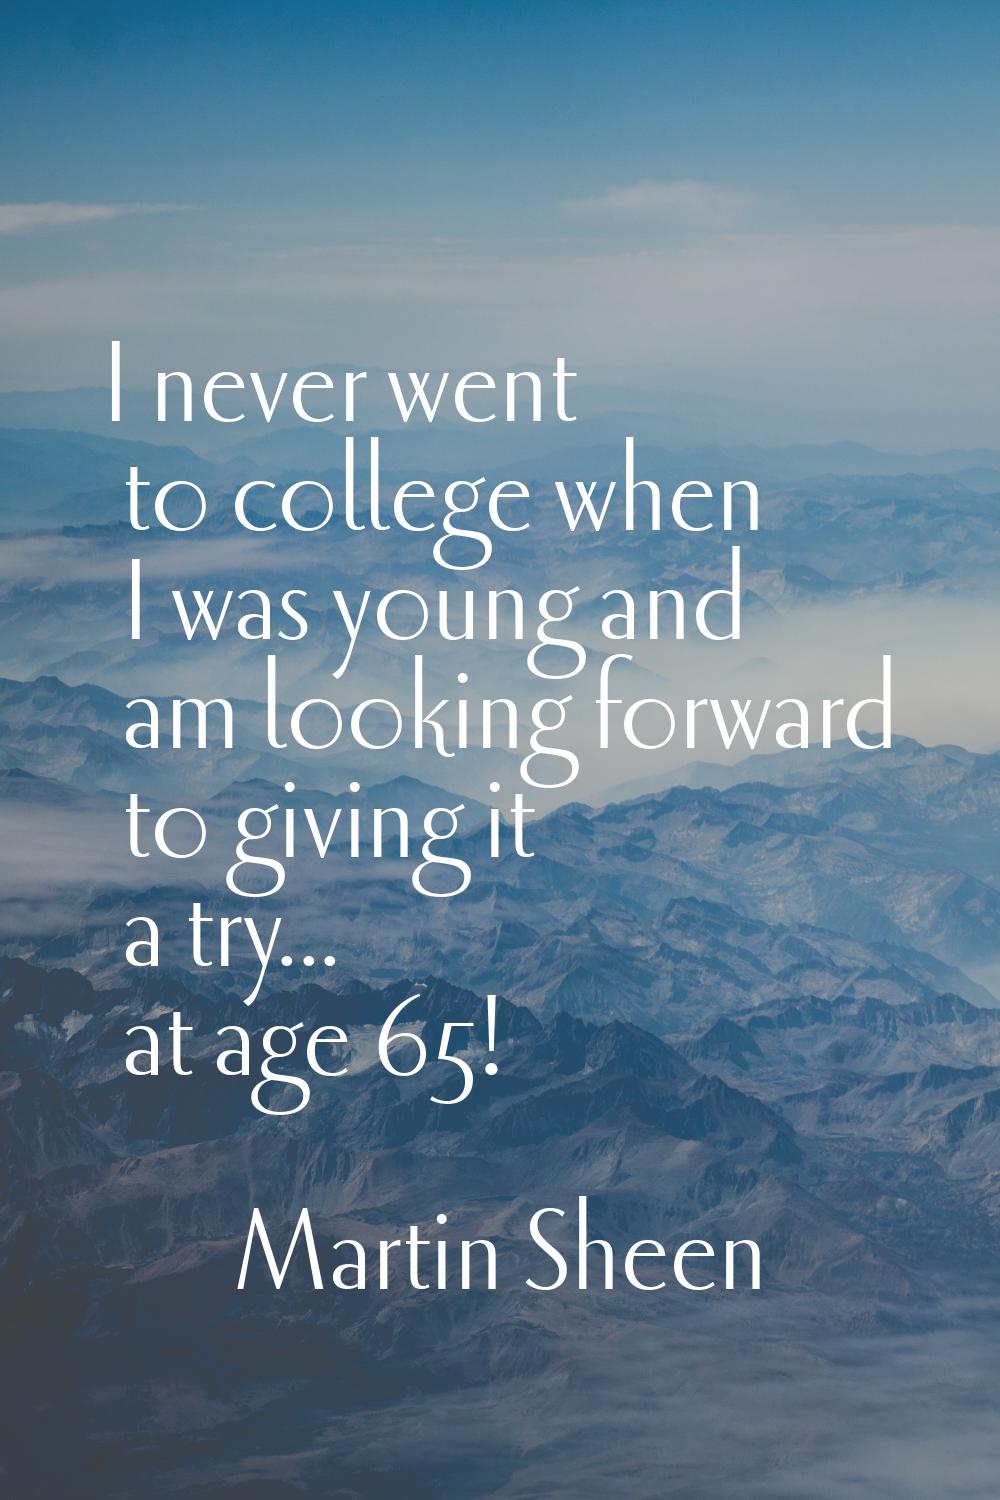 I never went to college when I was young and am looking forward to giving it a try... at age 65!